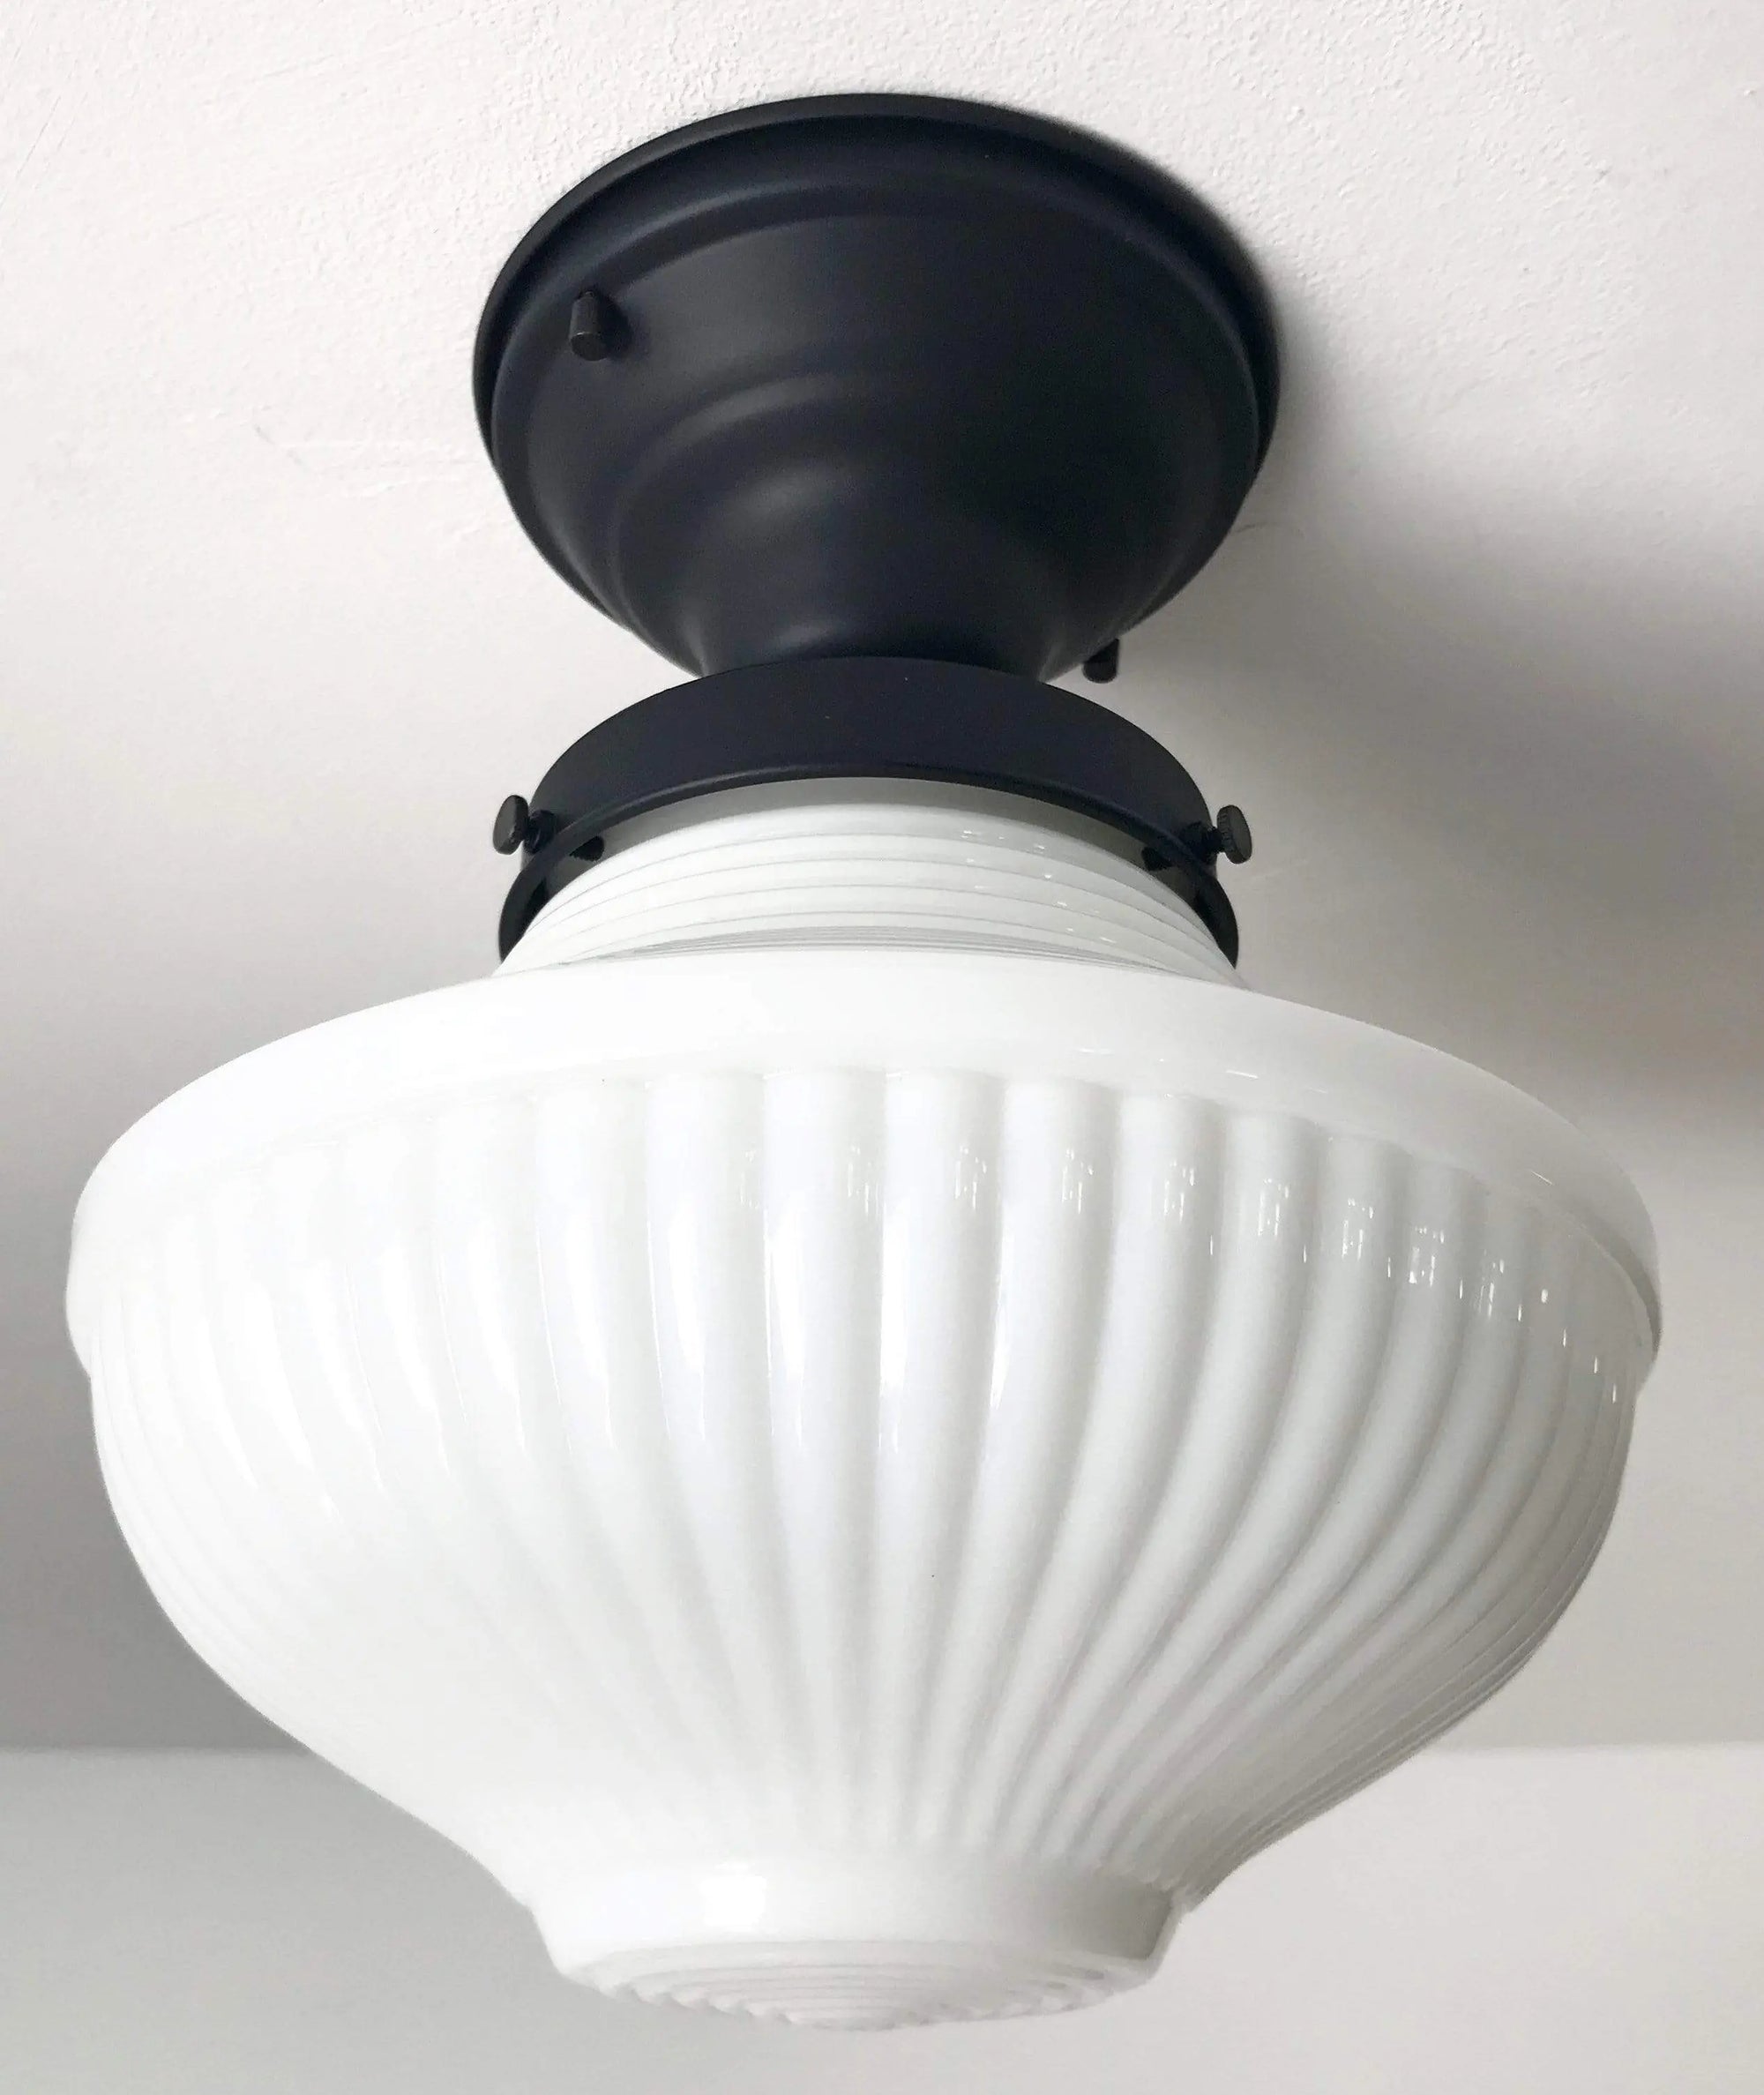 Traditional Milk Glass CEILING LIGHT Fixture The Lamp Goods